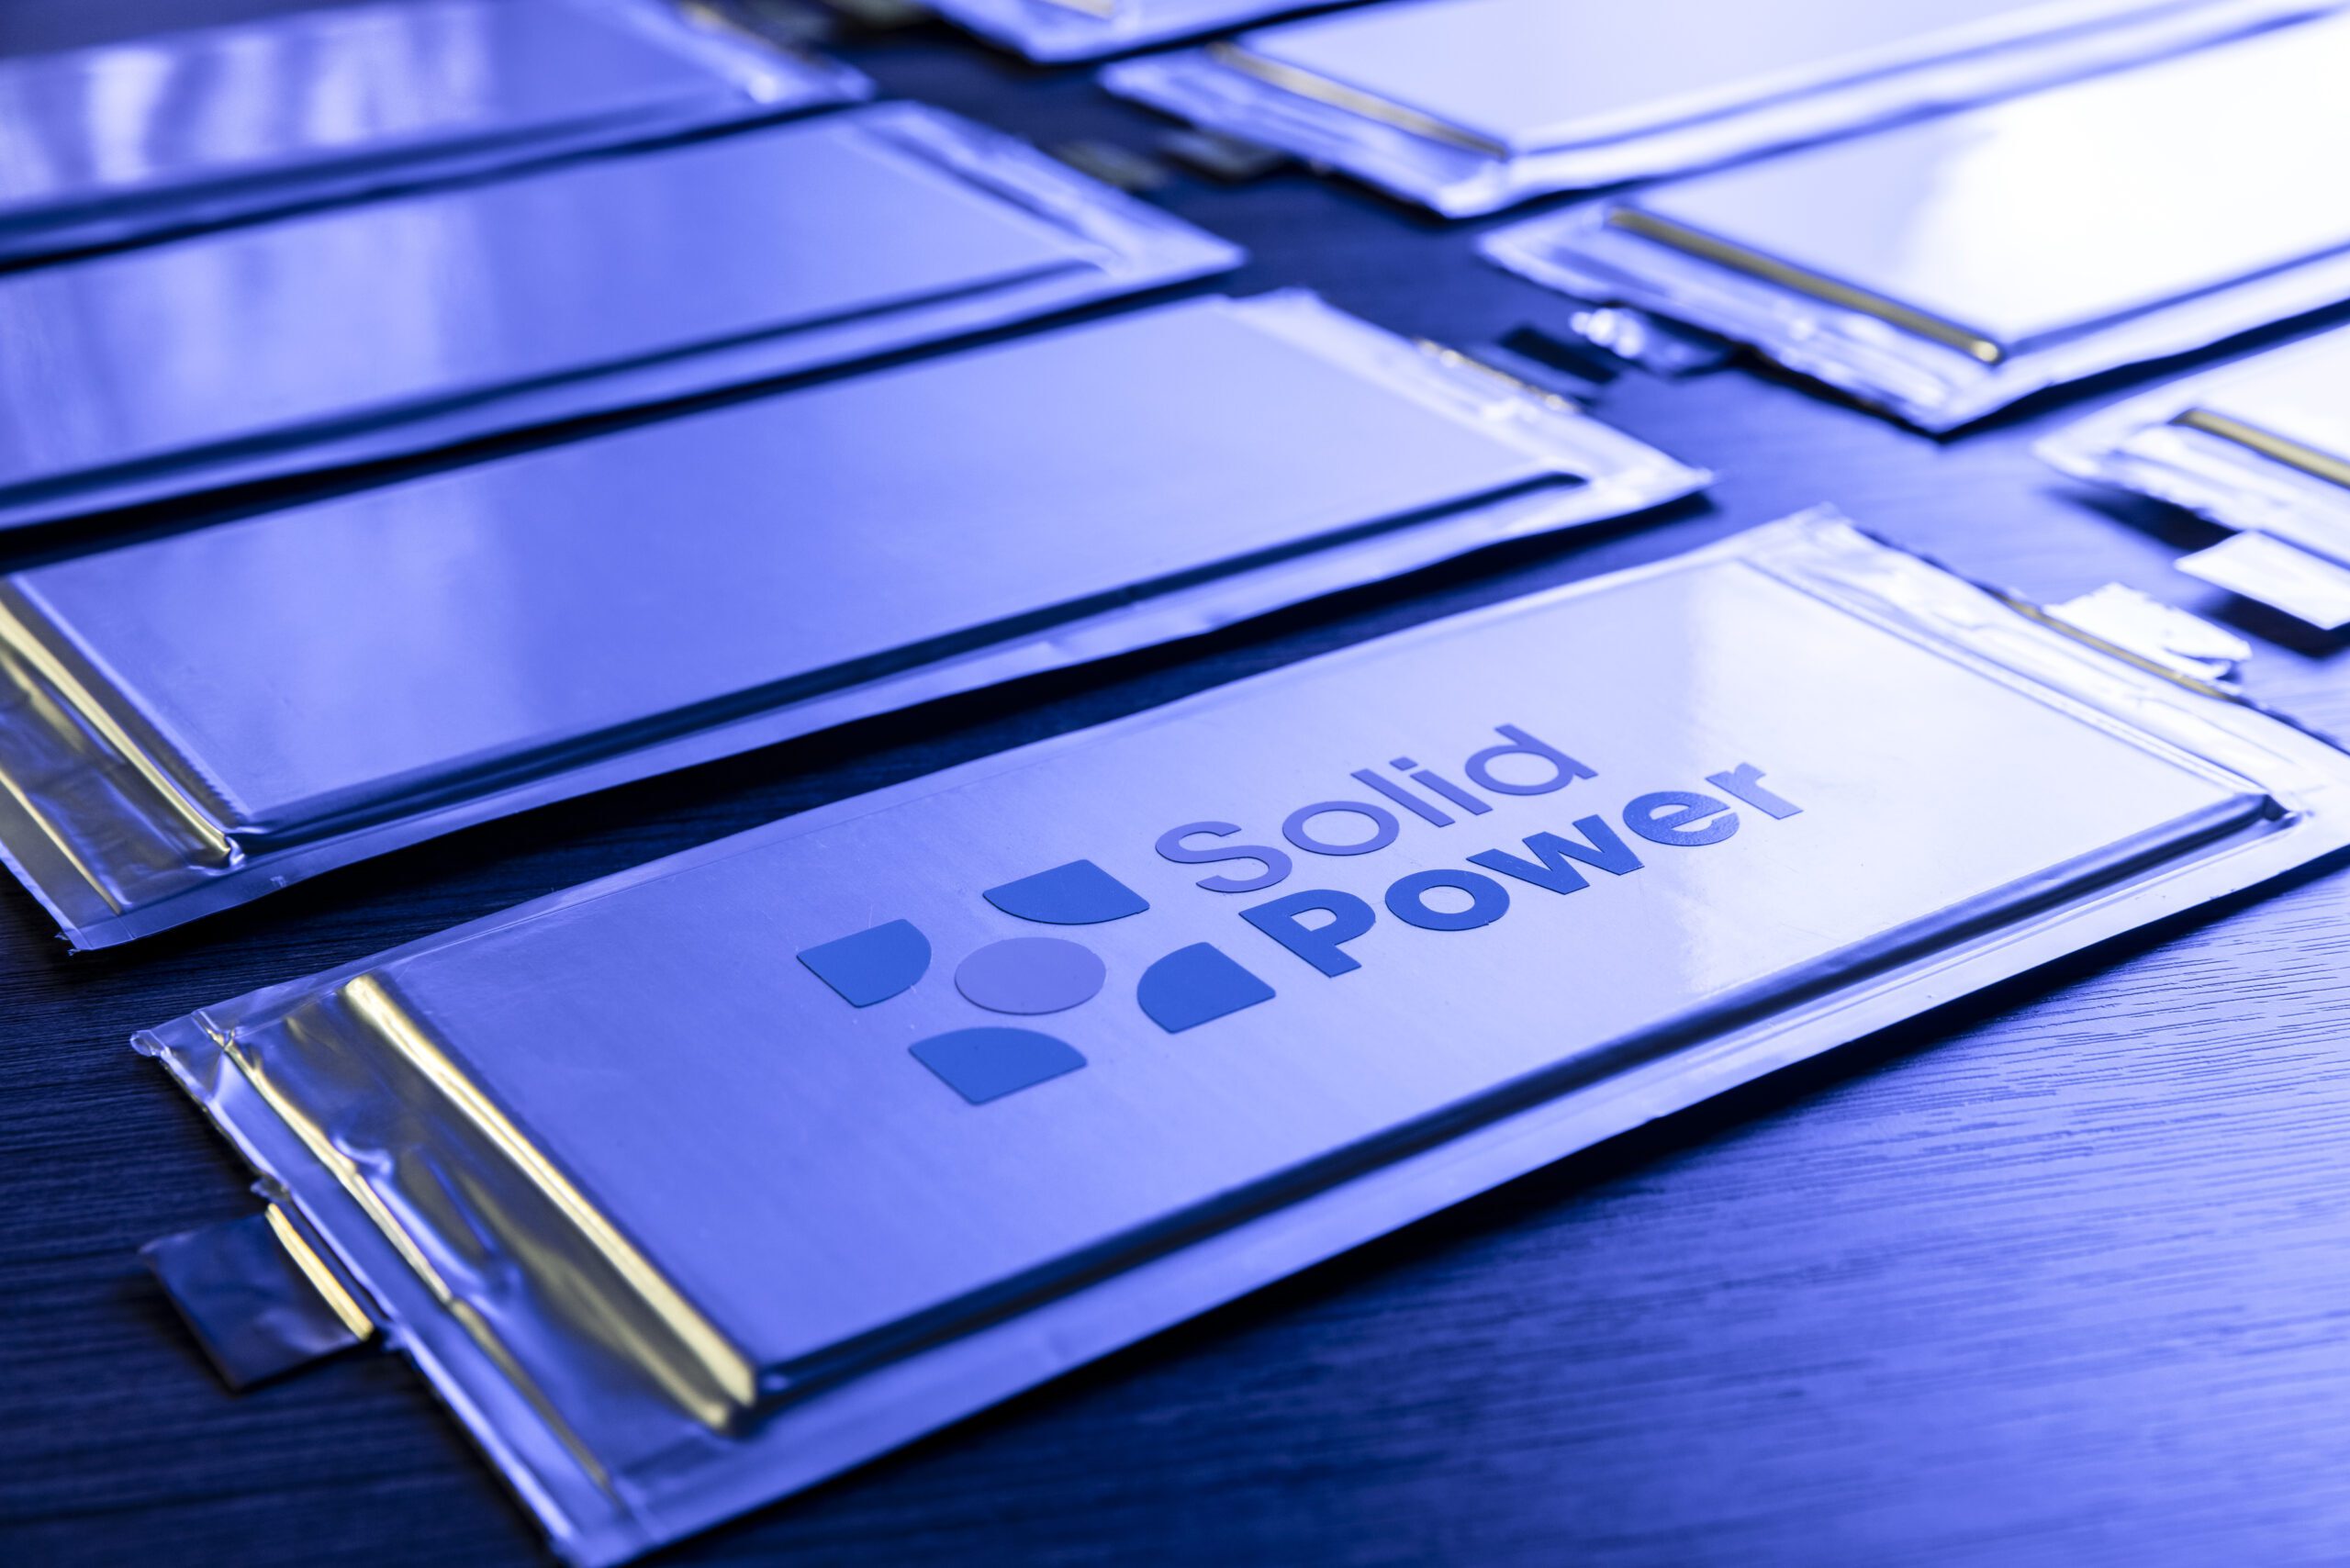 Solid Power’s all-solid-state battery